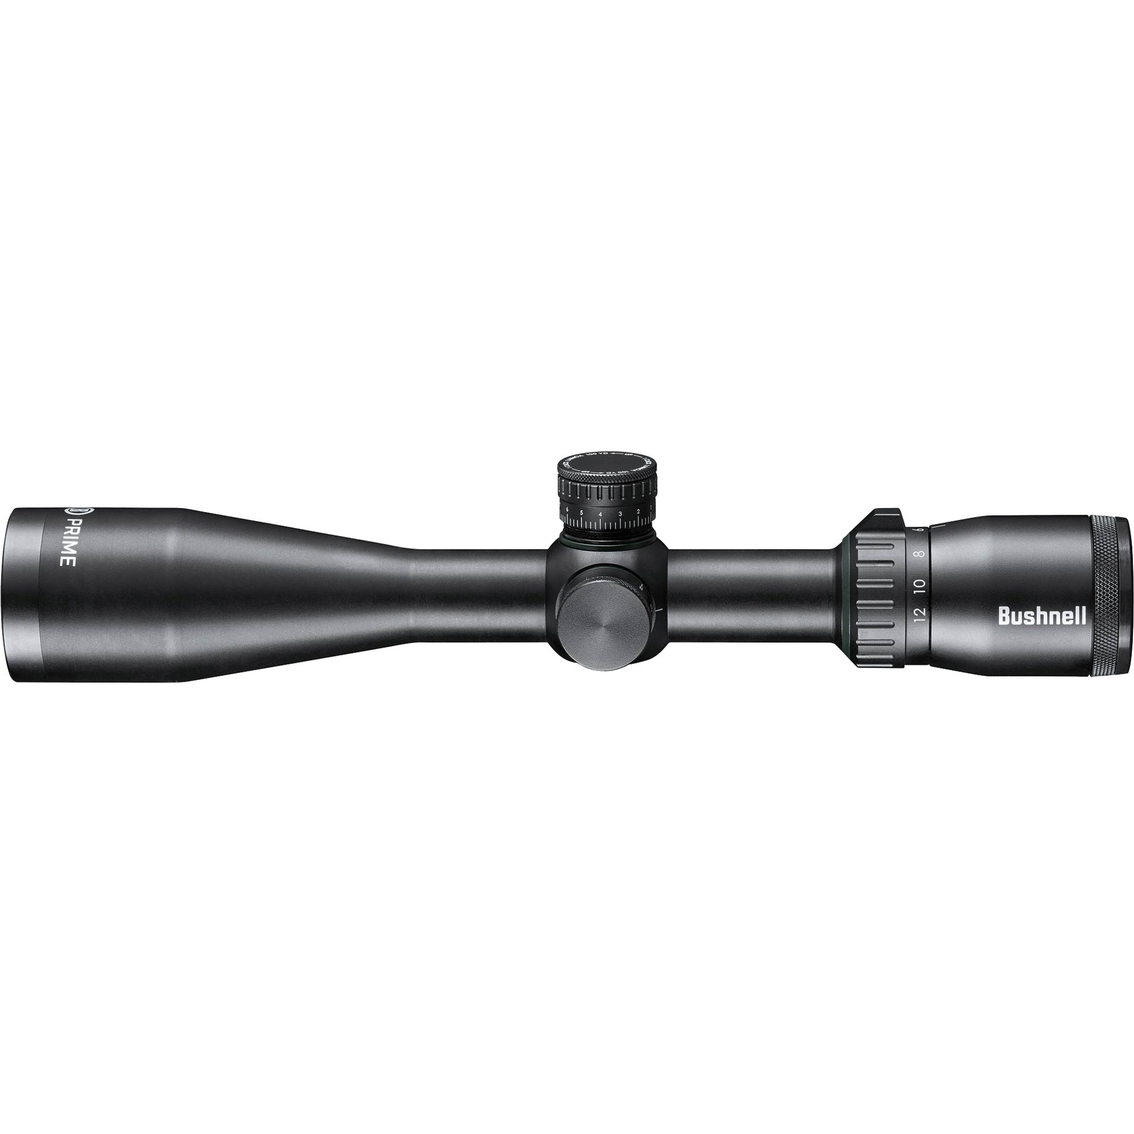 Bushnell Authorized Prime 3 12x40 1 In Multi X Reticle Rifle Scope